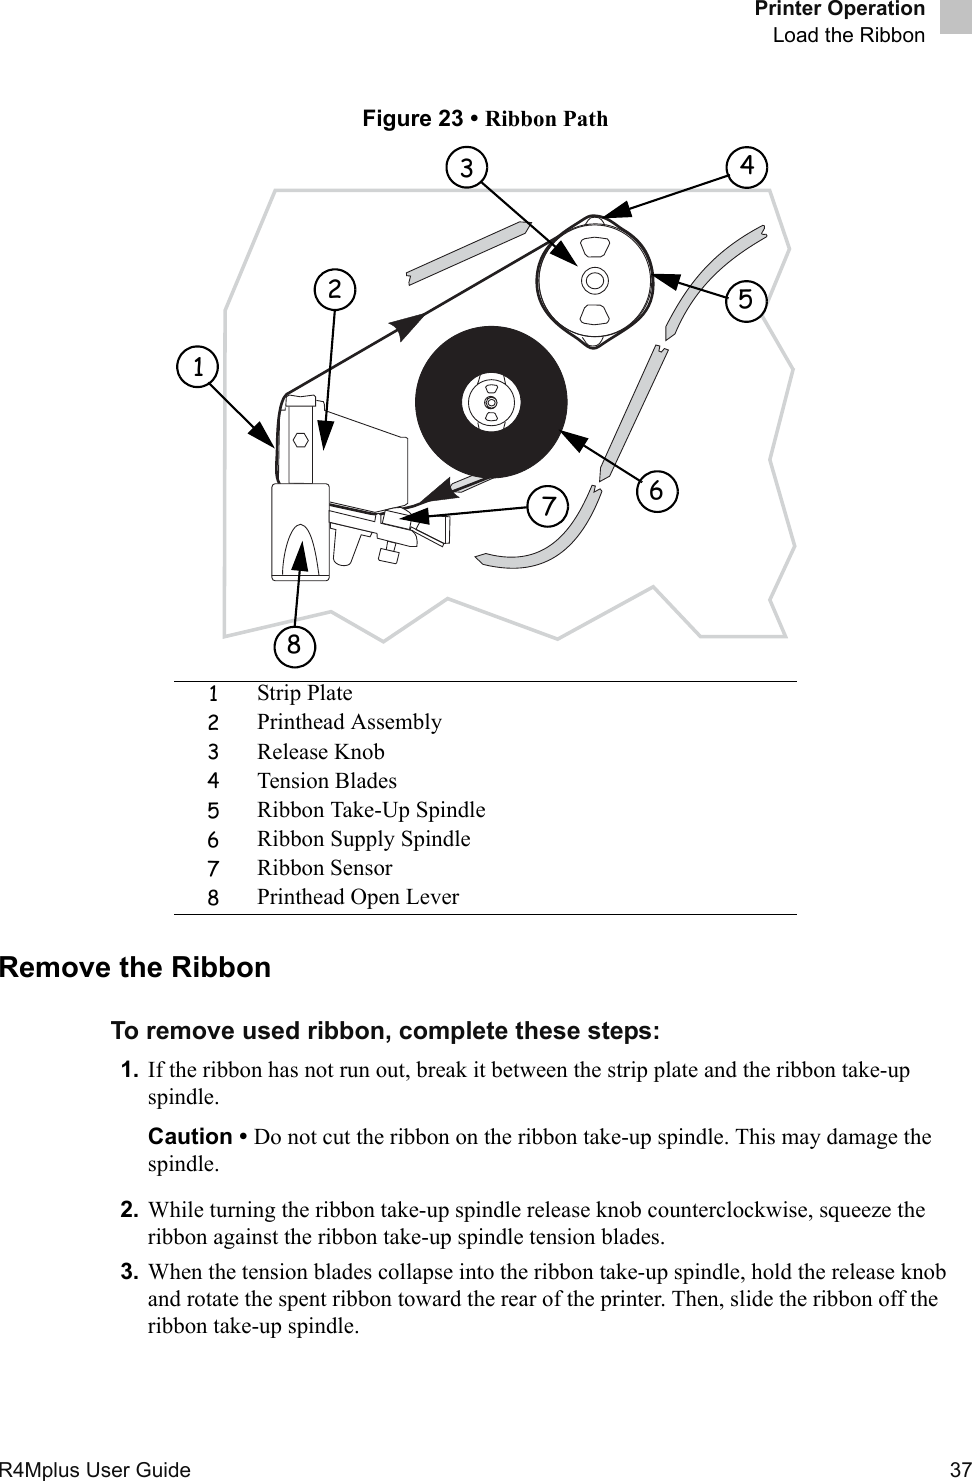 Printer OperationLoad the RibbonR4Mplus User Guide  37Figure 23 • Ribbon PathRemove the RibbonTo remove used ribbon, complete these steps:1. If the ribbon has not run out, break it between the strip plate and the ribbon take-up spindle.2. While turning the ribbon take-up spindle release knob counterclockwise, squeeze the ribbon against the ribbon take-up spindle tension blades.3. When the tension blades collapse into the ribbon take-up spindle, hold the release knob and rotate the spent ribbon toward the rear of the printer. Then, slide the ribbon off the ribbon take-up spindle.1Strip Plate2Printhead Assembly3Release Knob4Tension Blades5Ribbon Take-Up Spindle6Ribbon Supply Spindle7Ribbon Sensor8Printhead Open LeverCaution • Do not cut the ribbon on the ribbon take-up spindle. This may damage the spindle.32145678